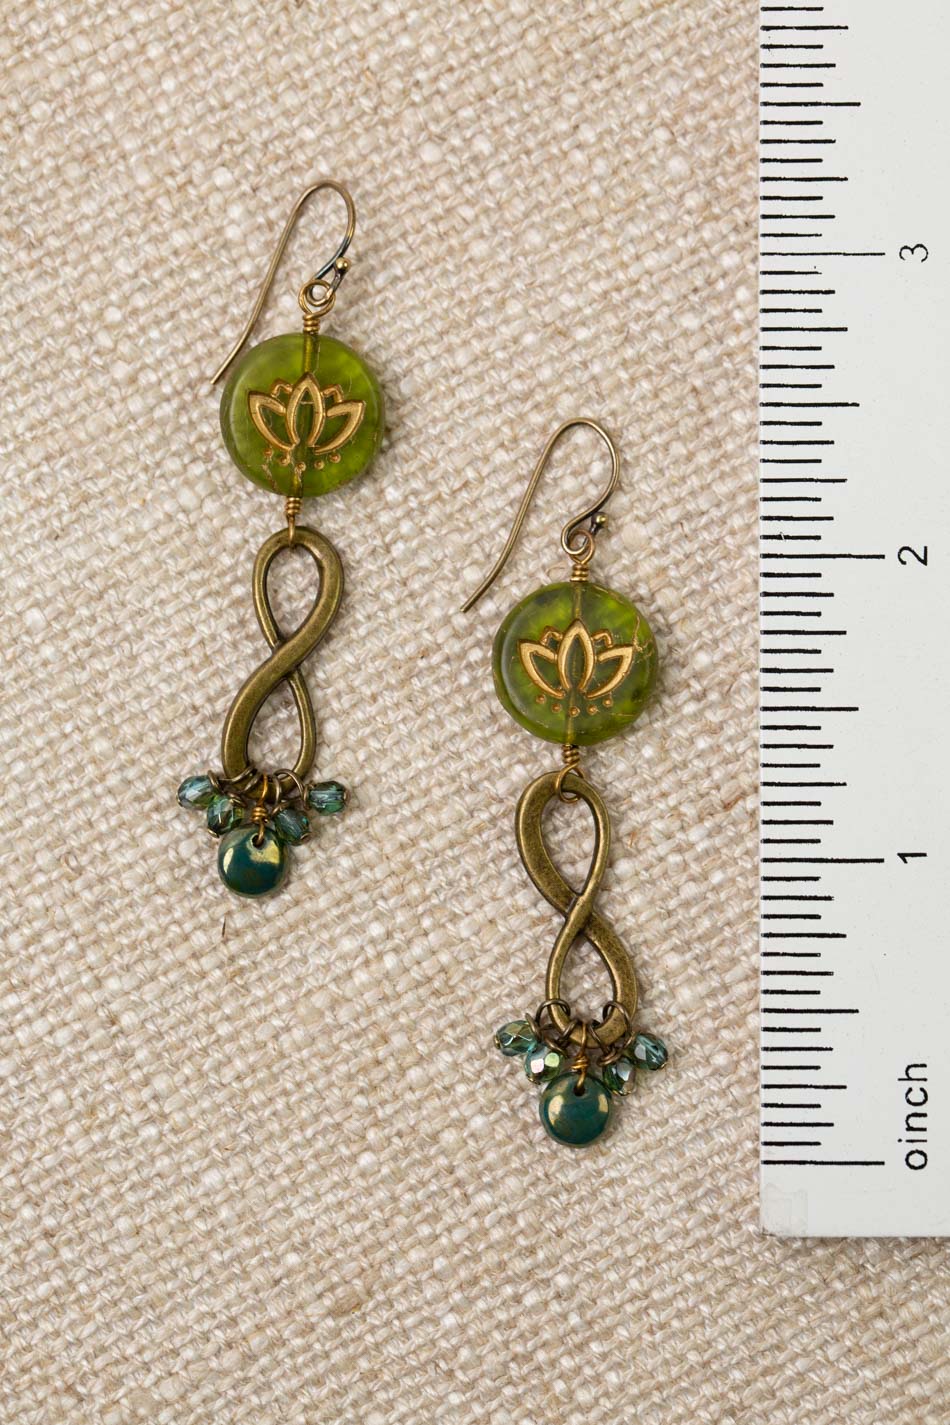 Czech Glass Infinity Symbol With Green Lotus With Gold Etching Dangle Earrings